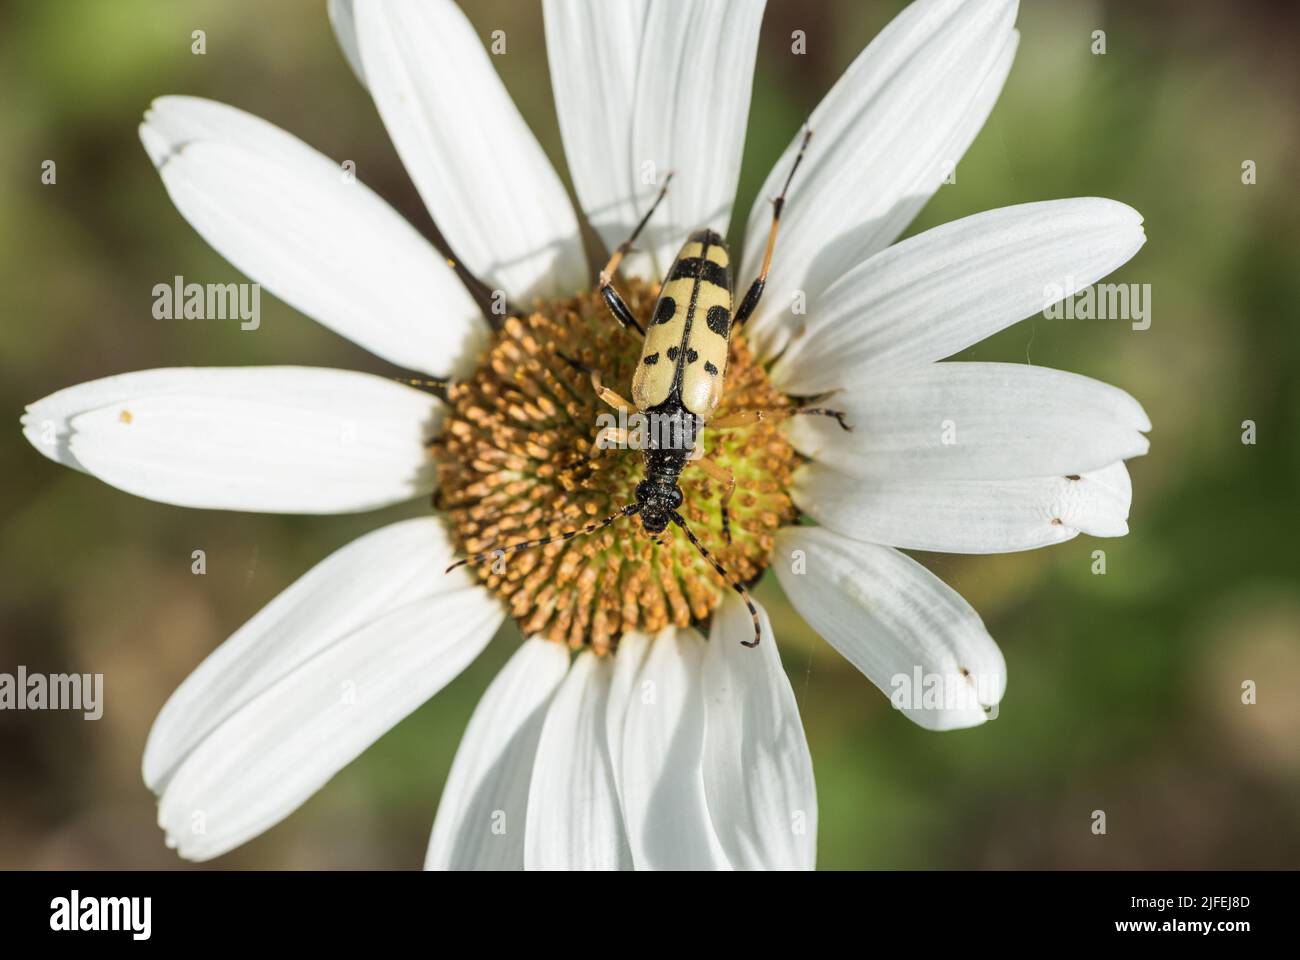 Foraging Spotted Longhorn beetle (Rutpela maculata) Stock Photo